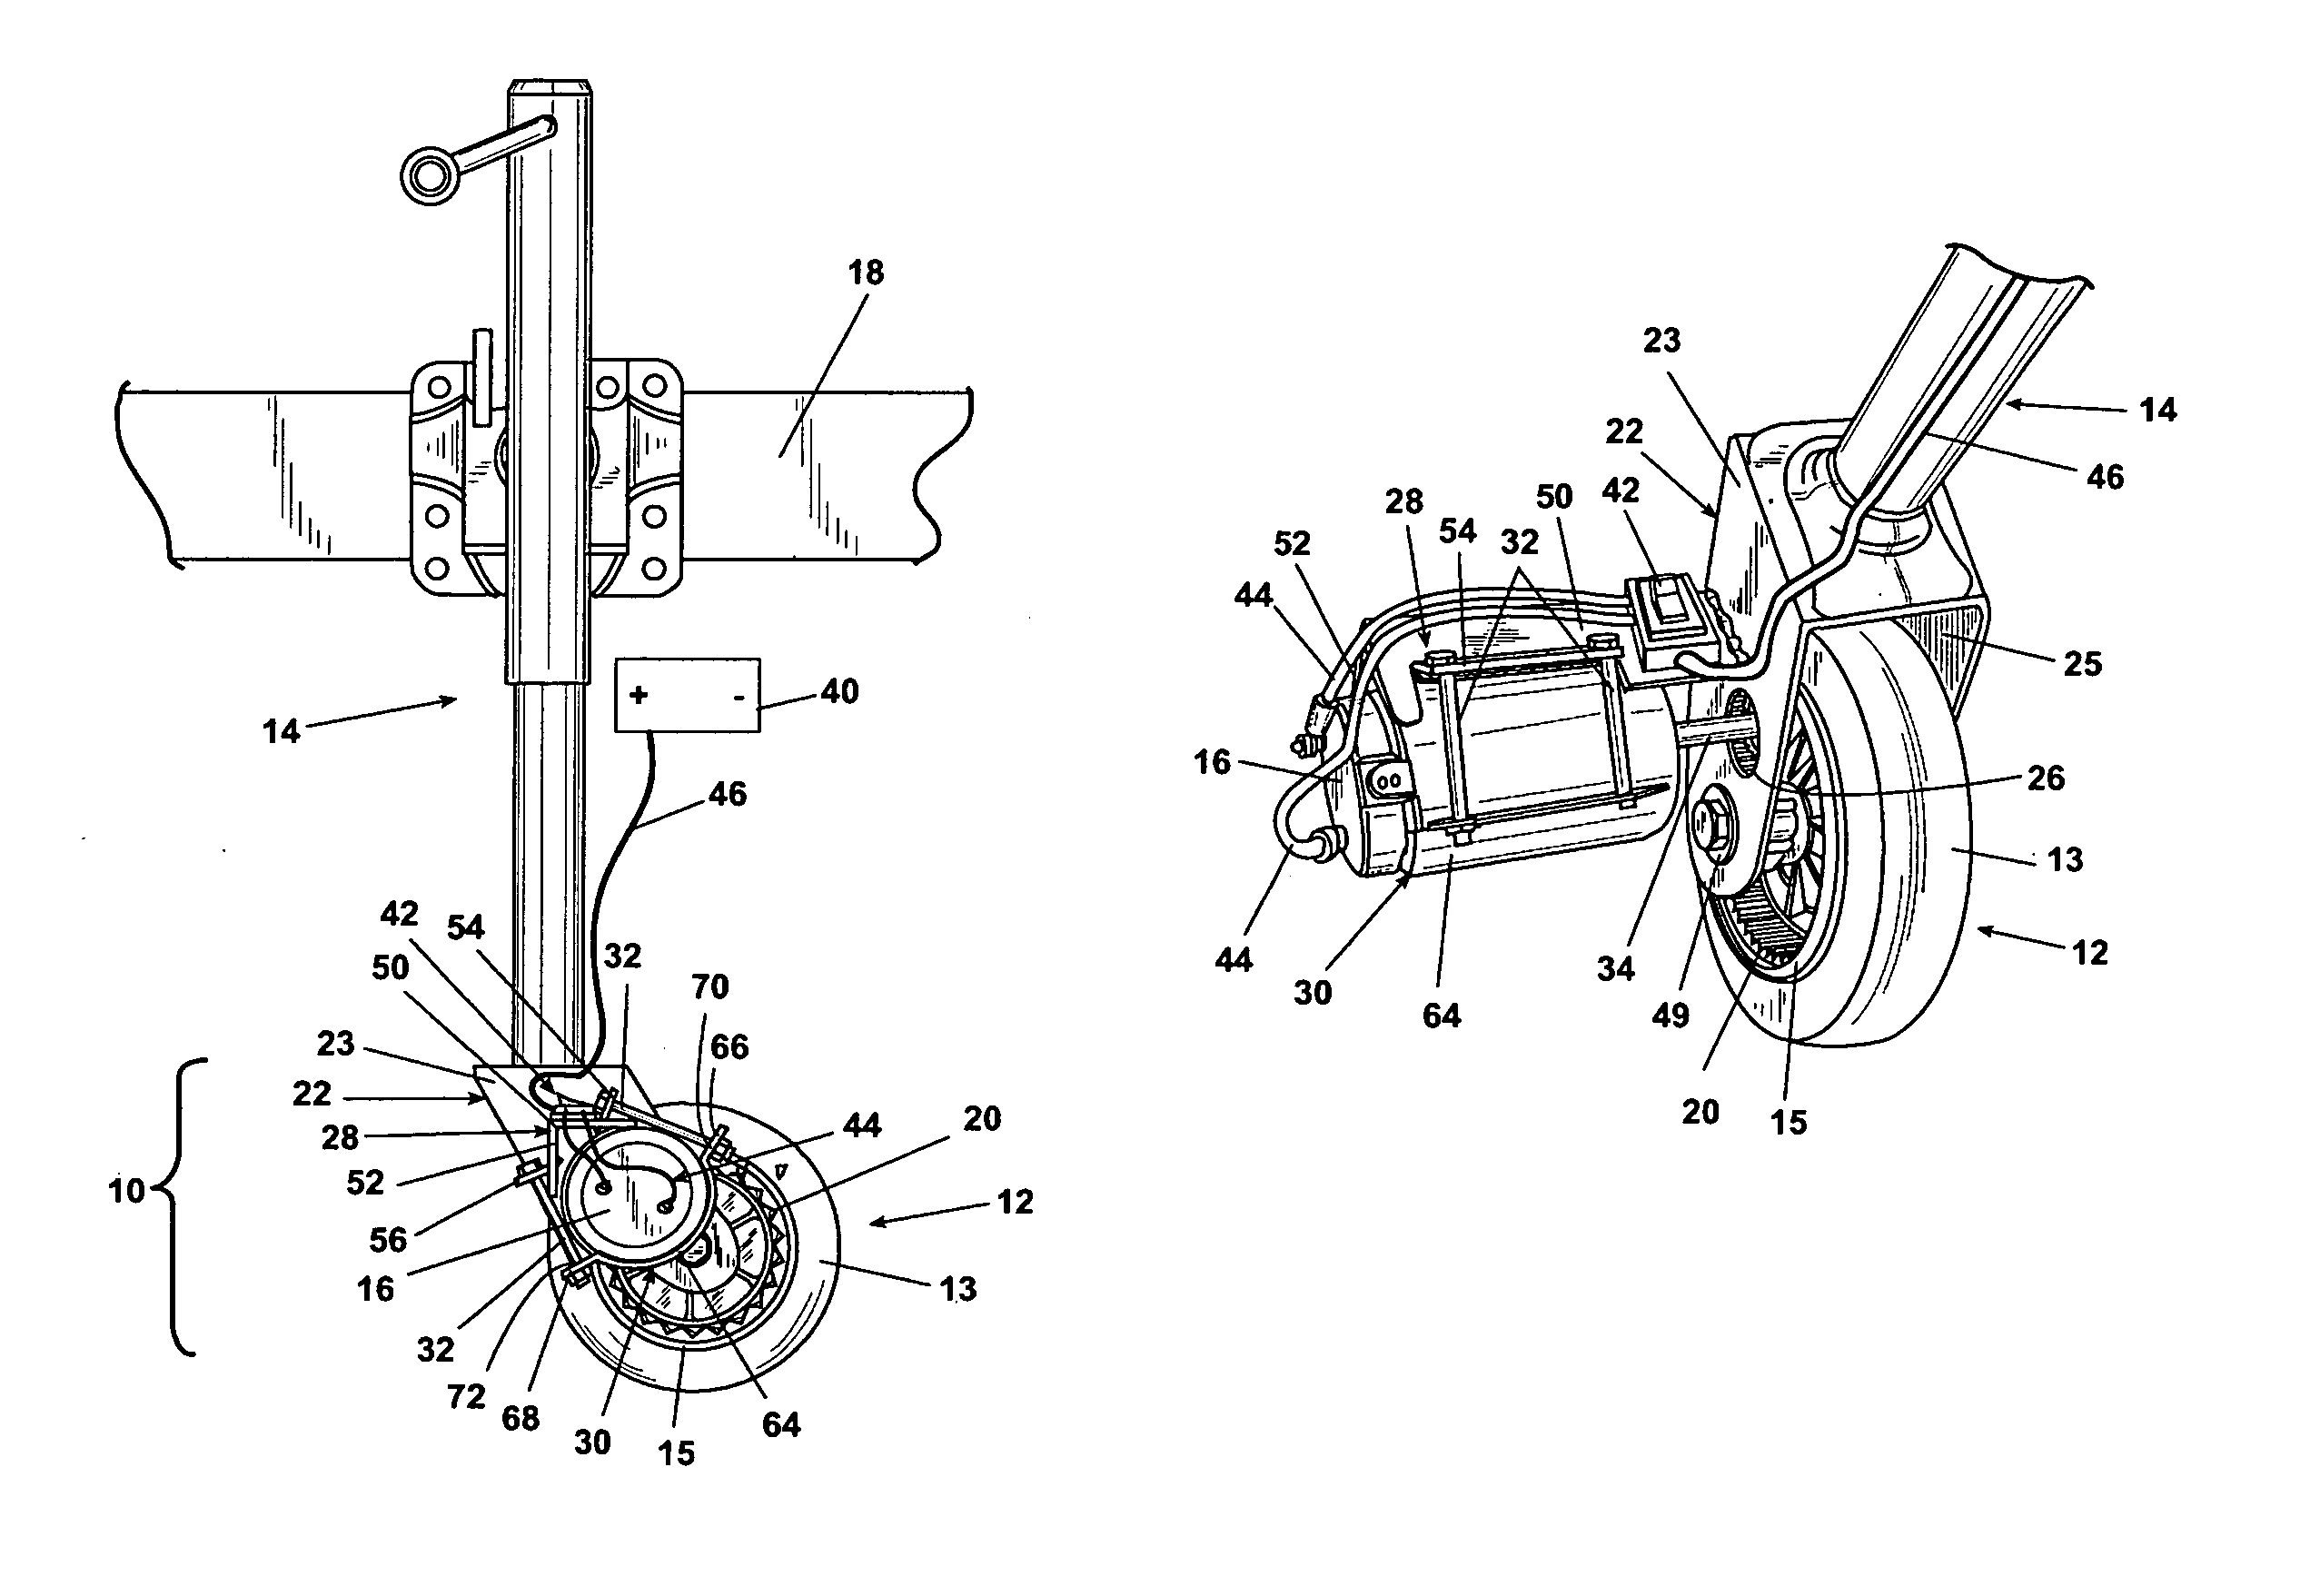 Motorized trailer wheel with direct drive and trailer incorporating same